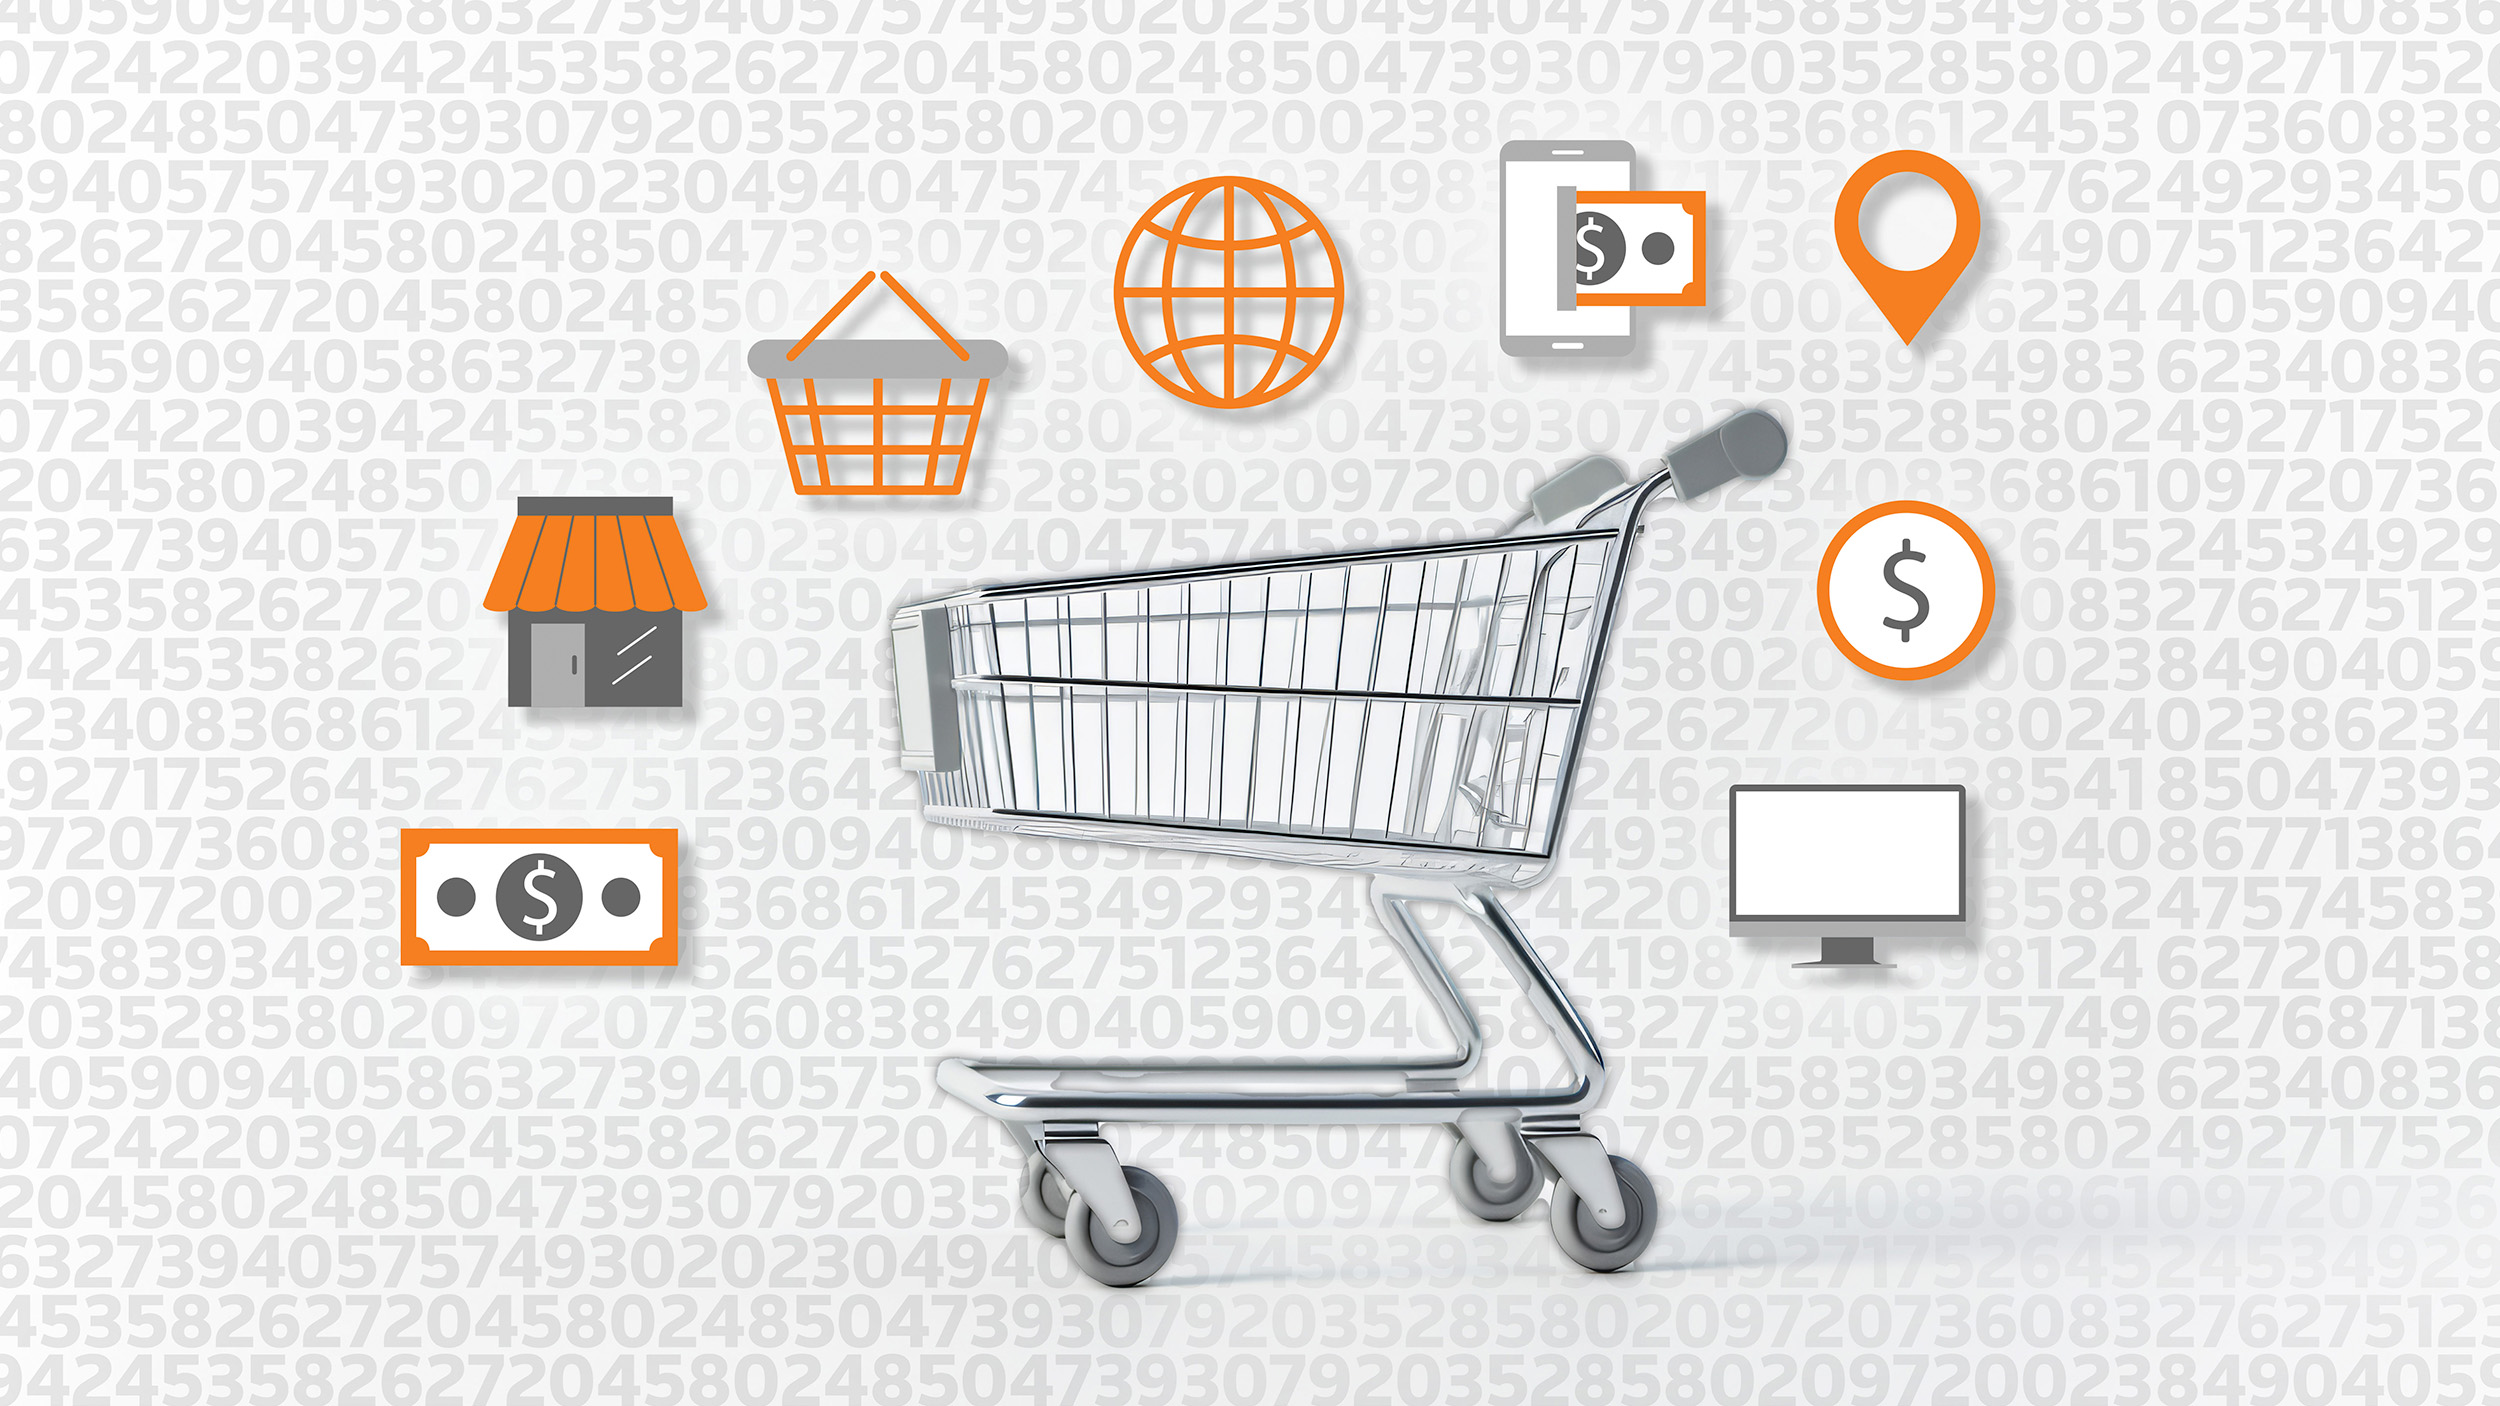 Graphic of a shopping cart with e-commerce icons surrounding it.